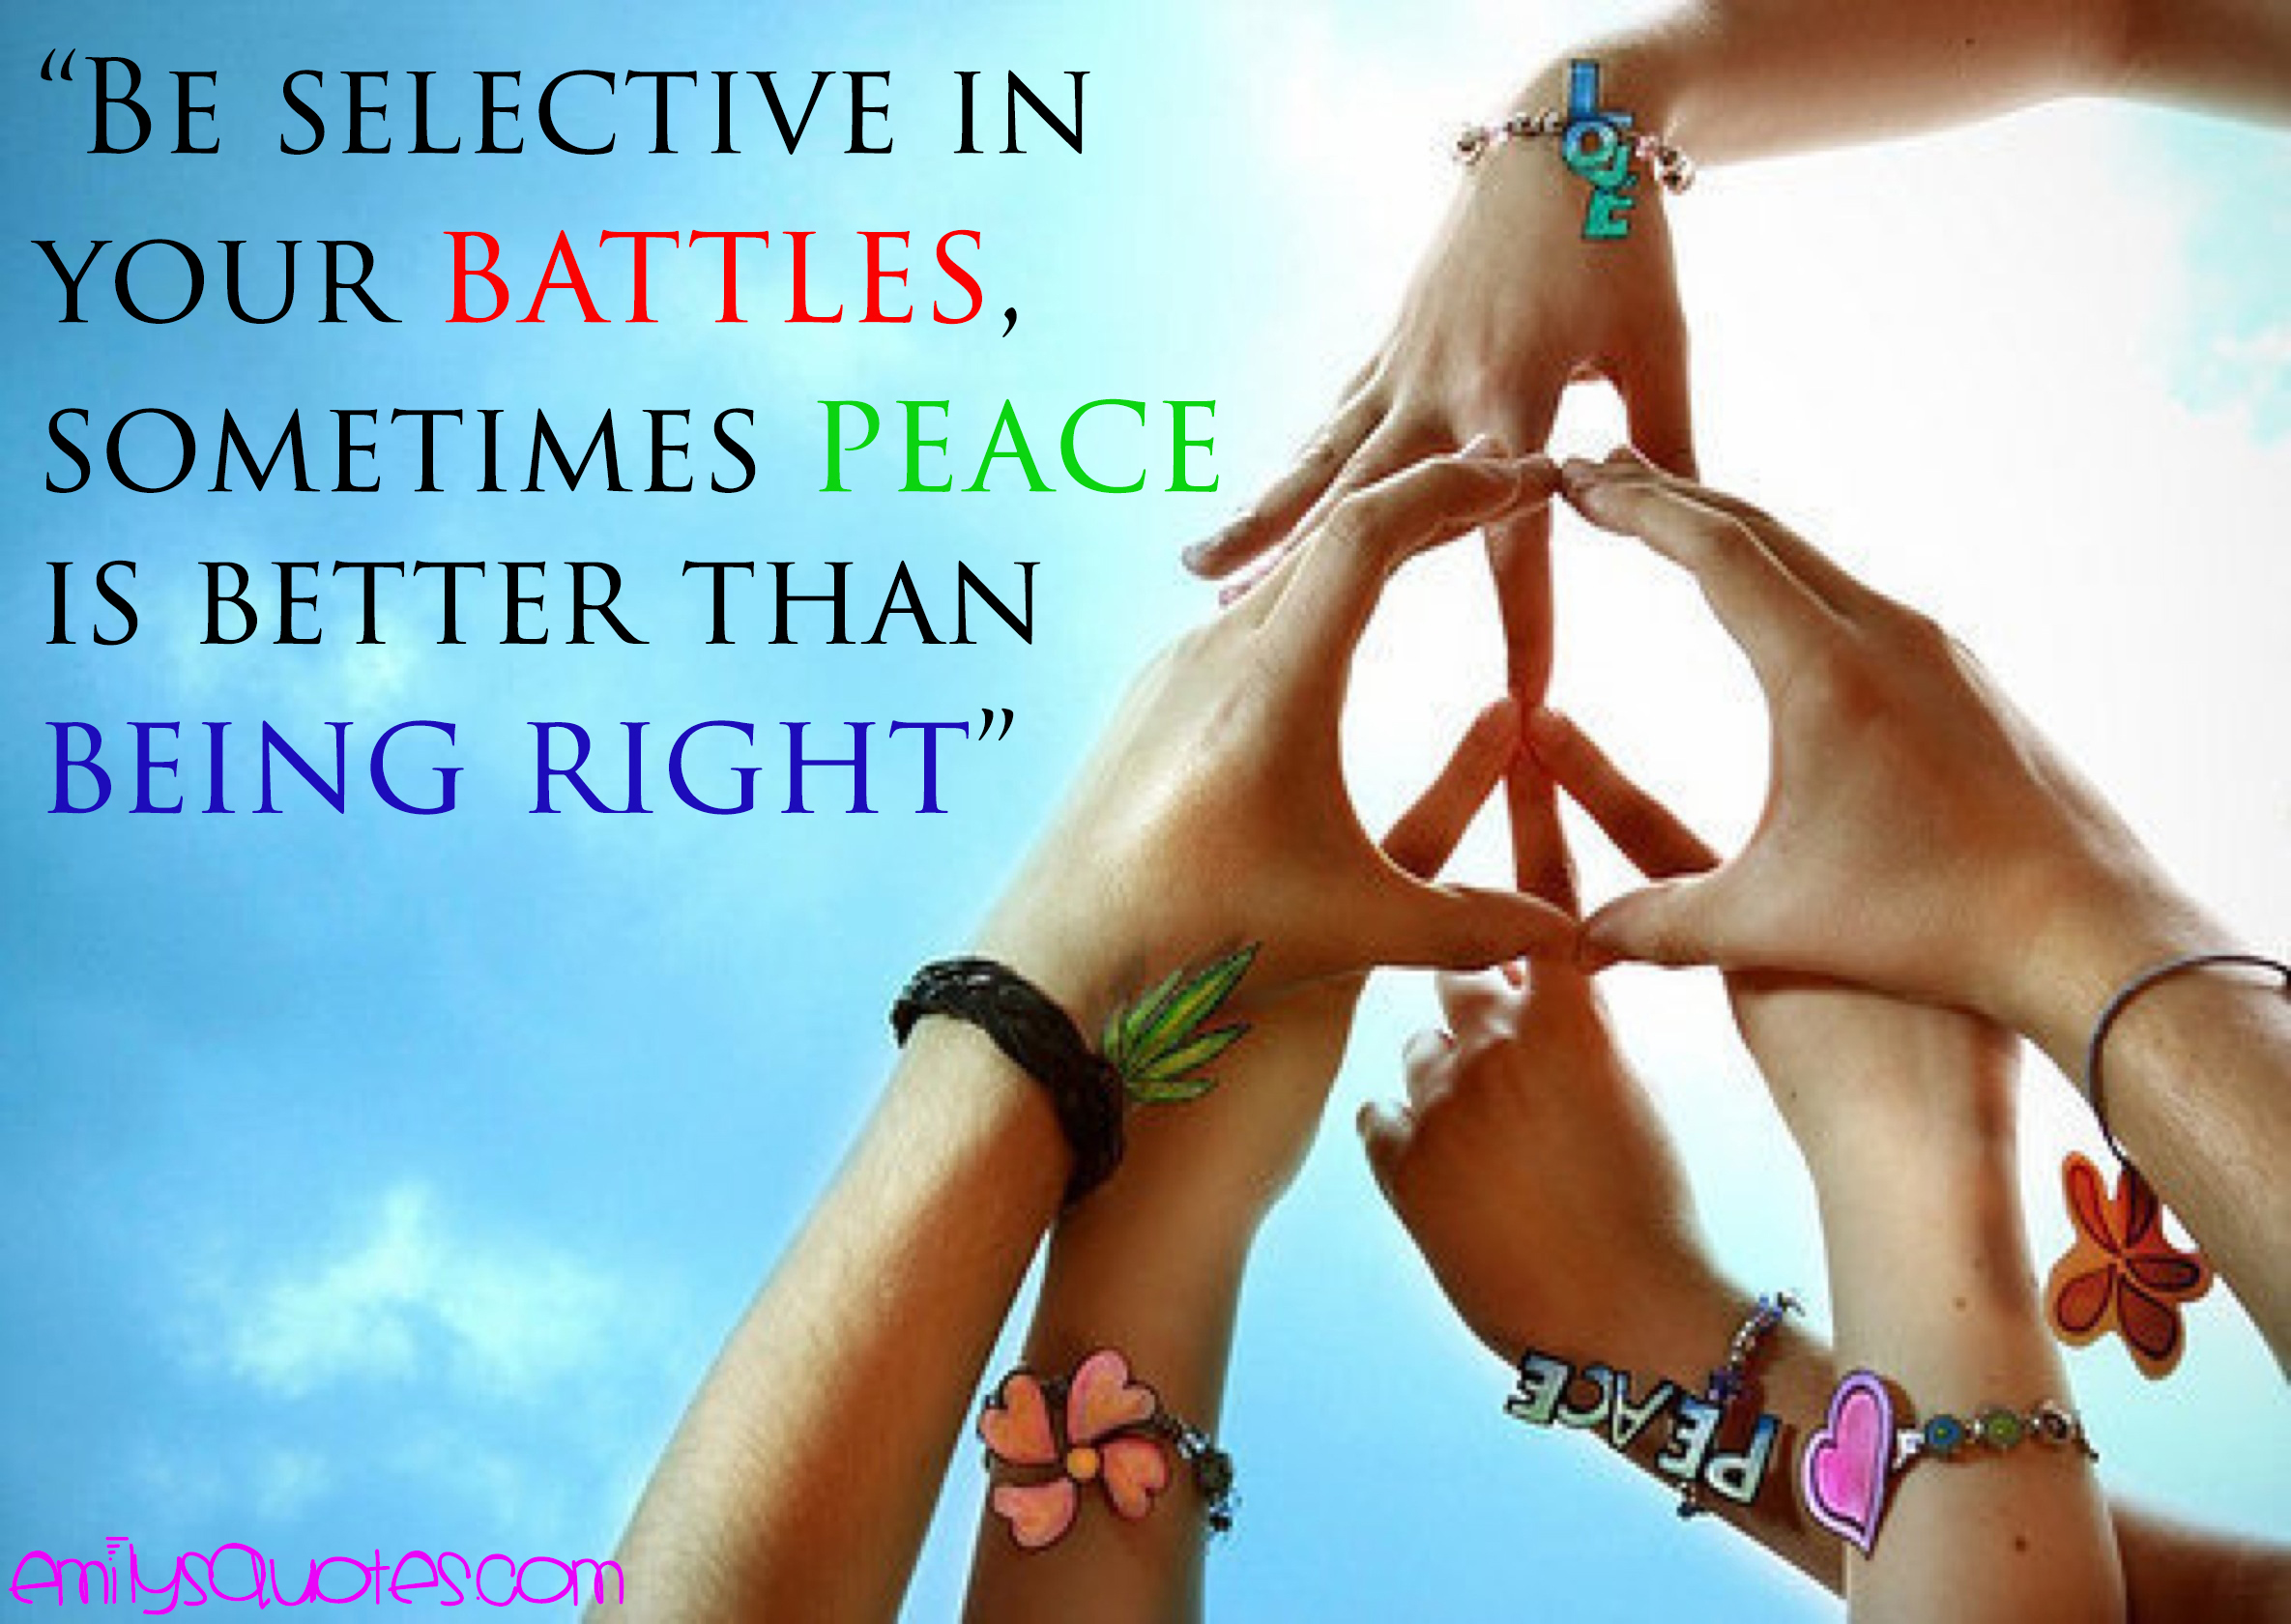 Be selective in your battles, sometimes peace is better than being right